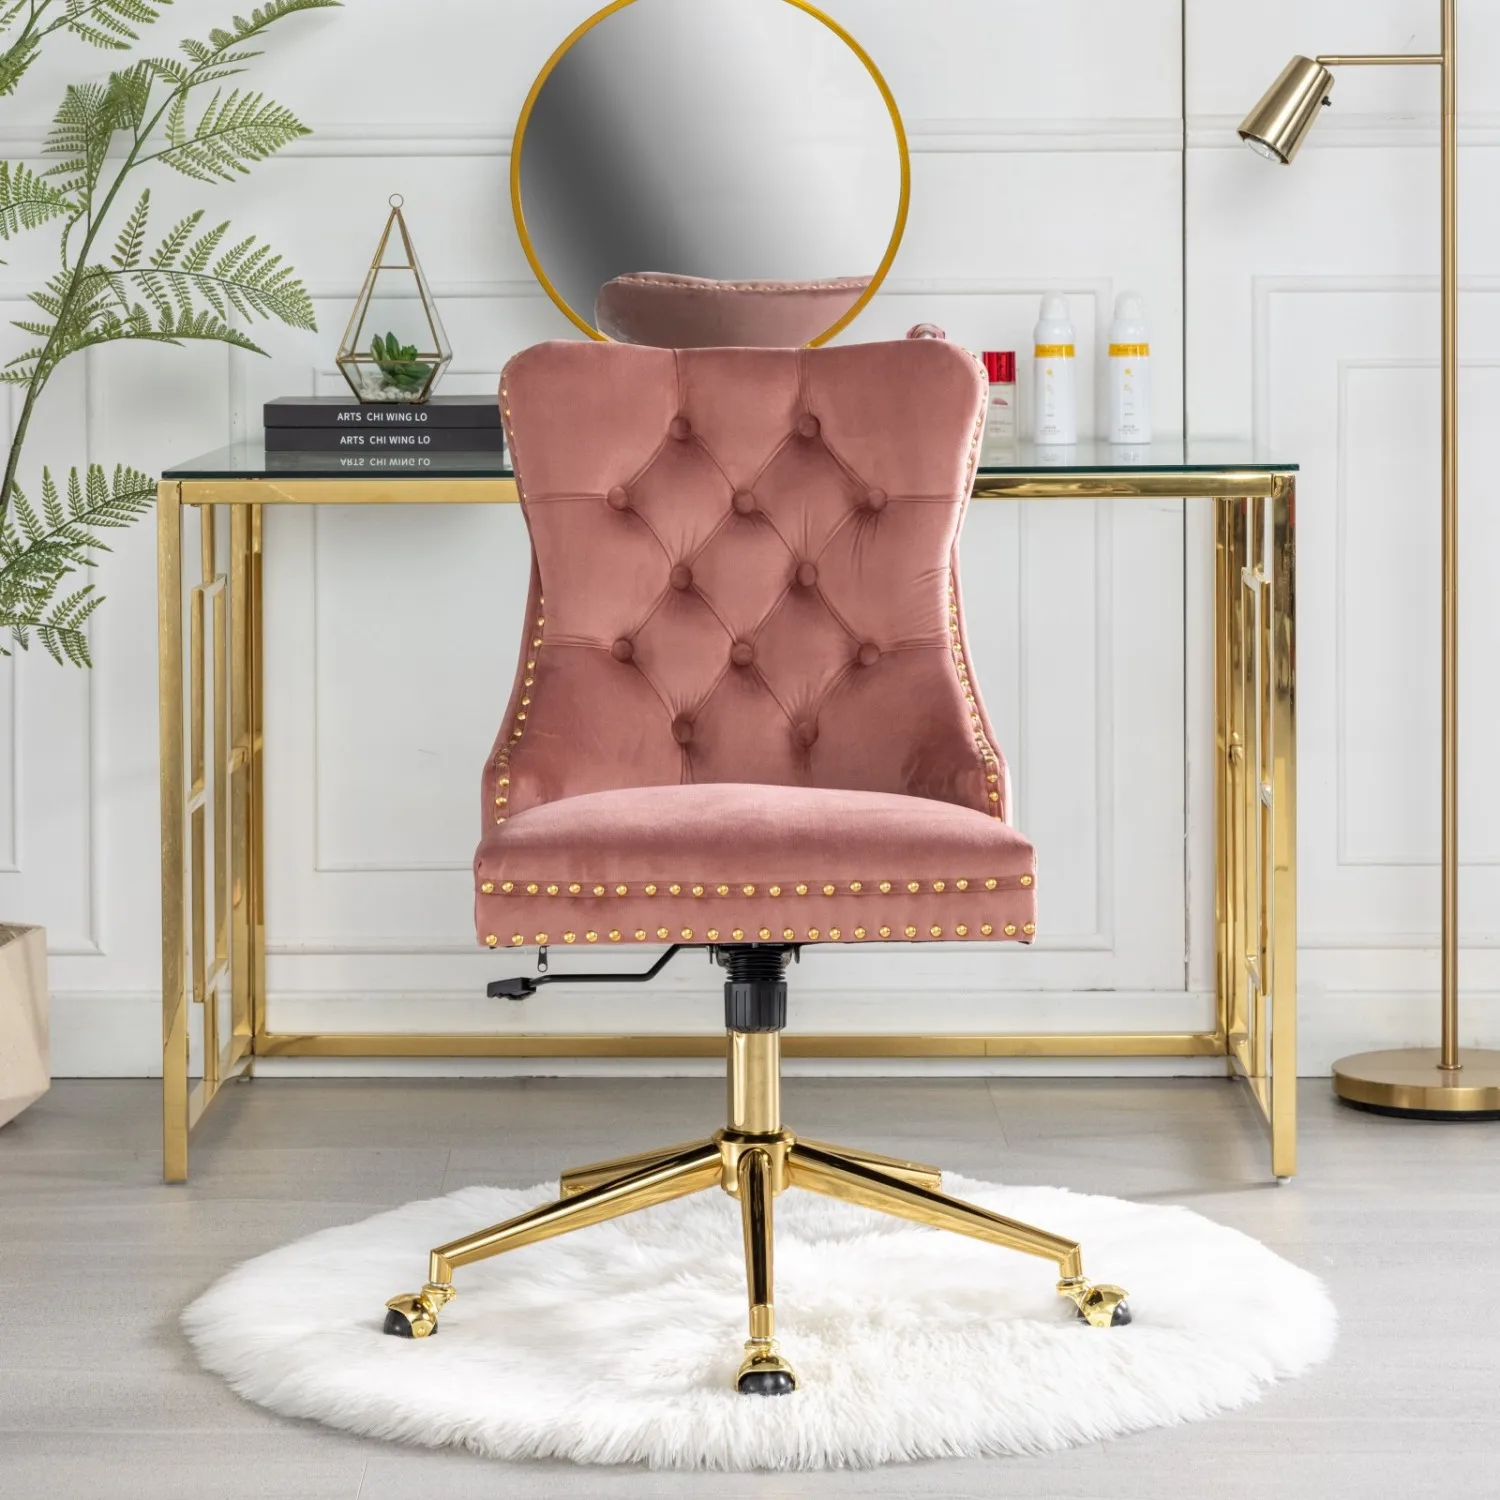 

Elegant Velvet Upholstered Tufted Button A&A Furniture Office Chair in Pink, Adjustable Swivel Desk Chair for Home Office with G